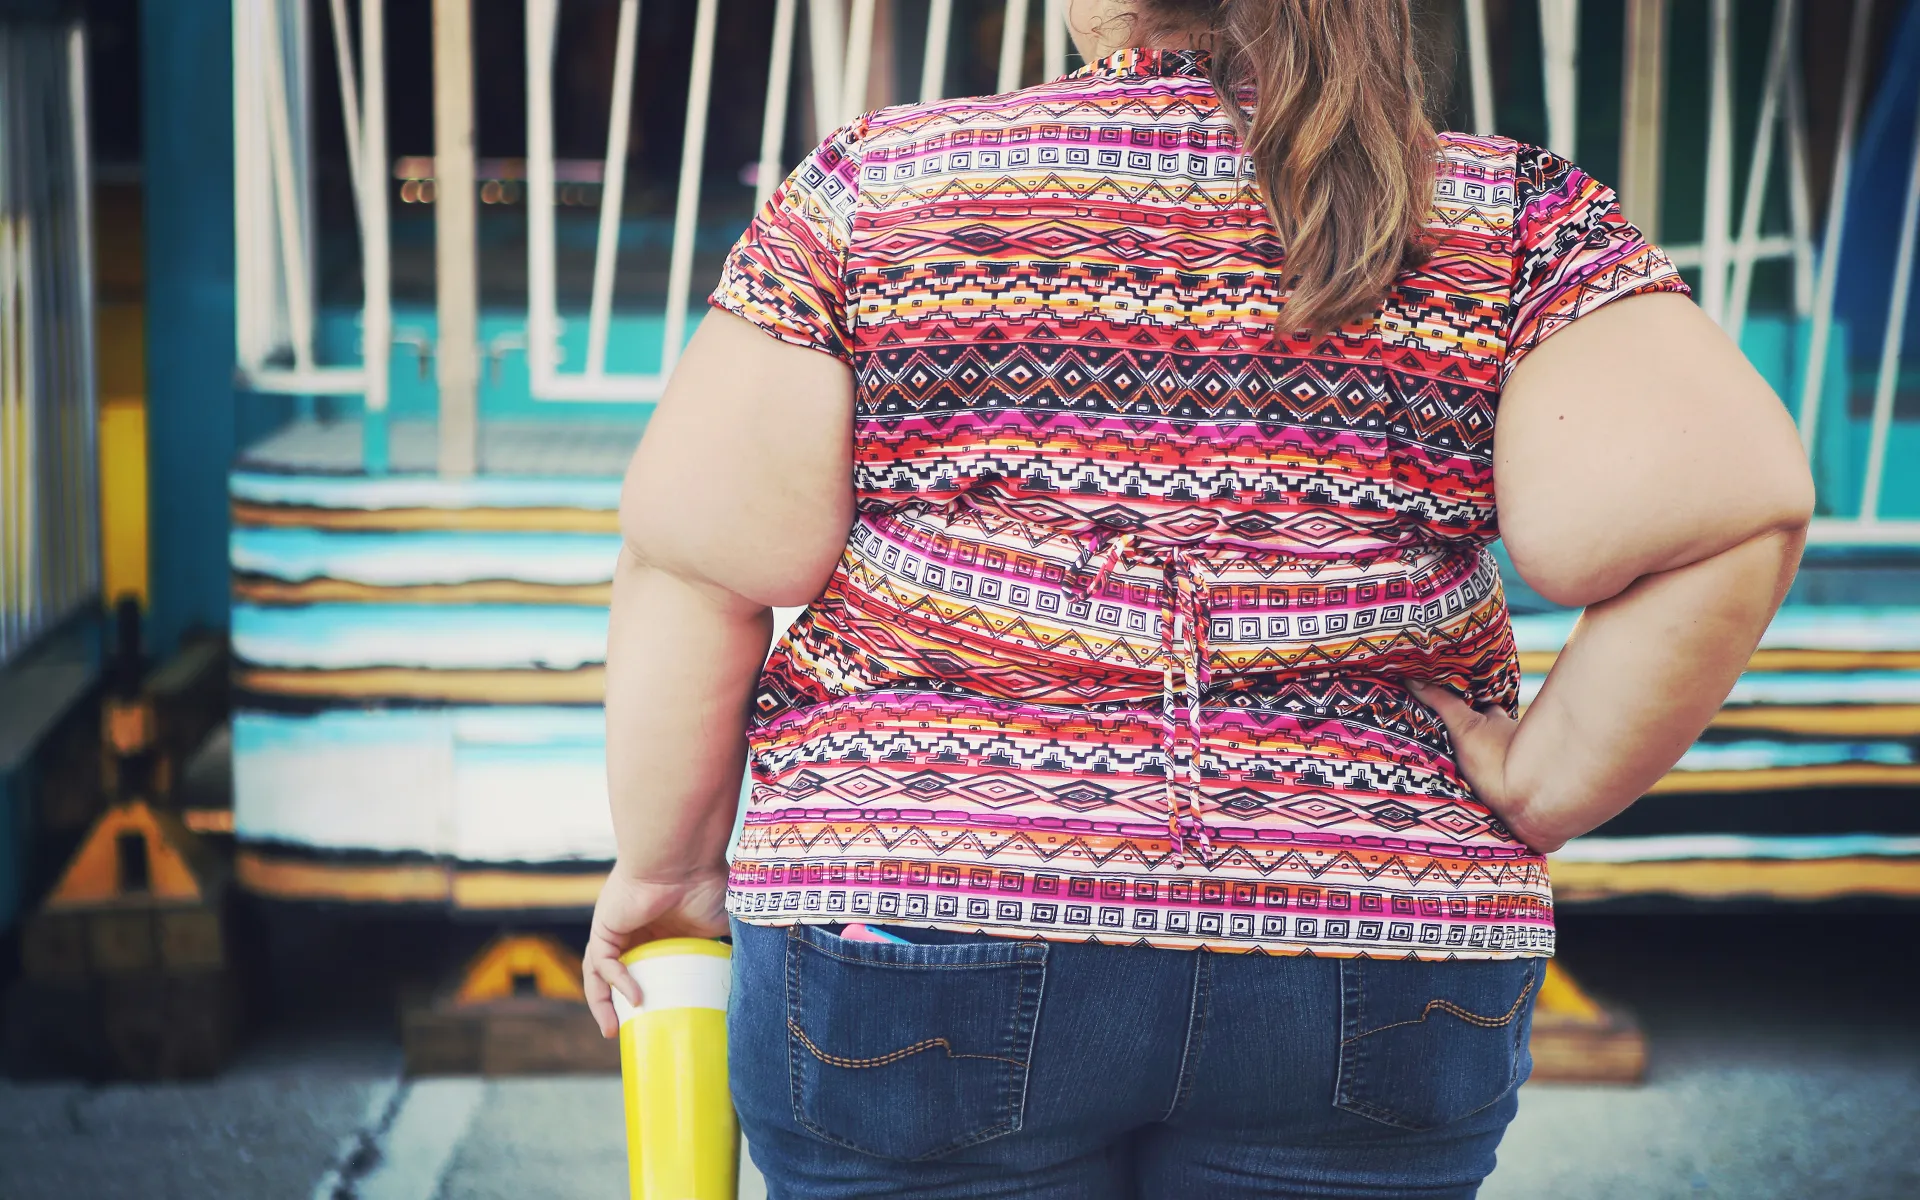 20 Most Overweight Cities in America